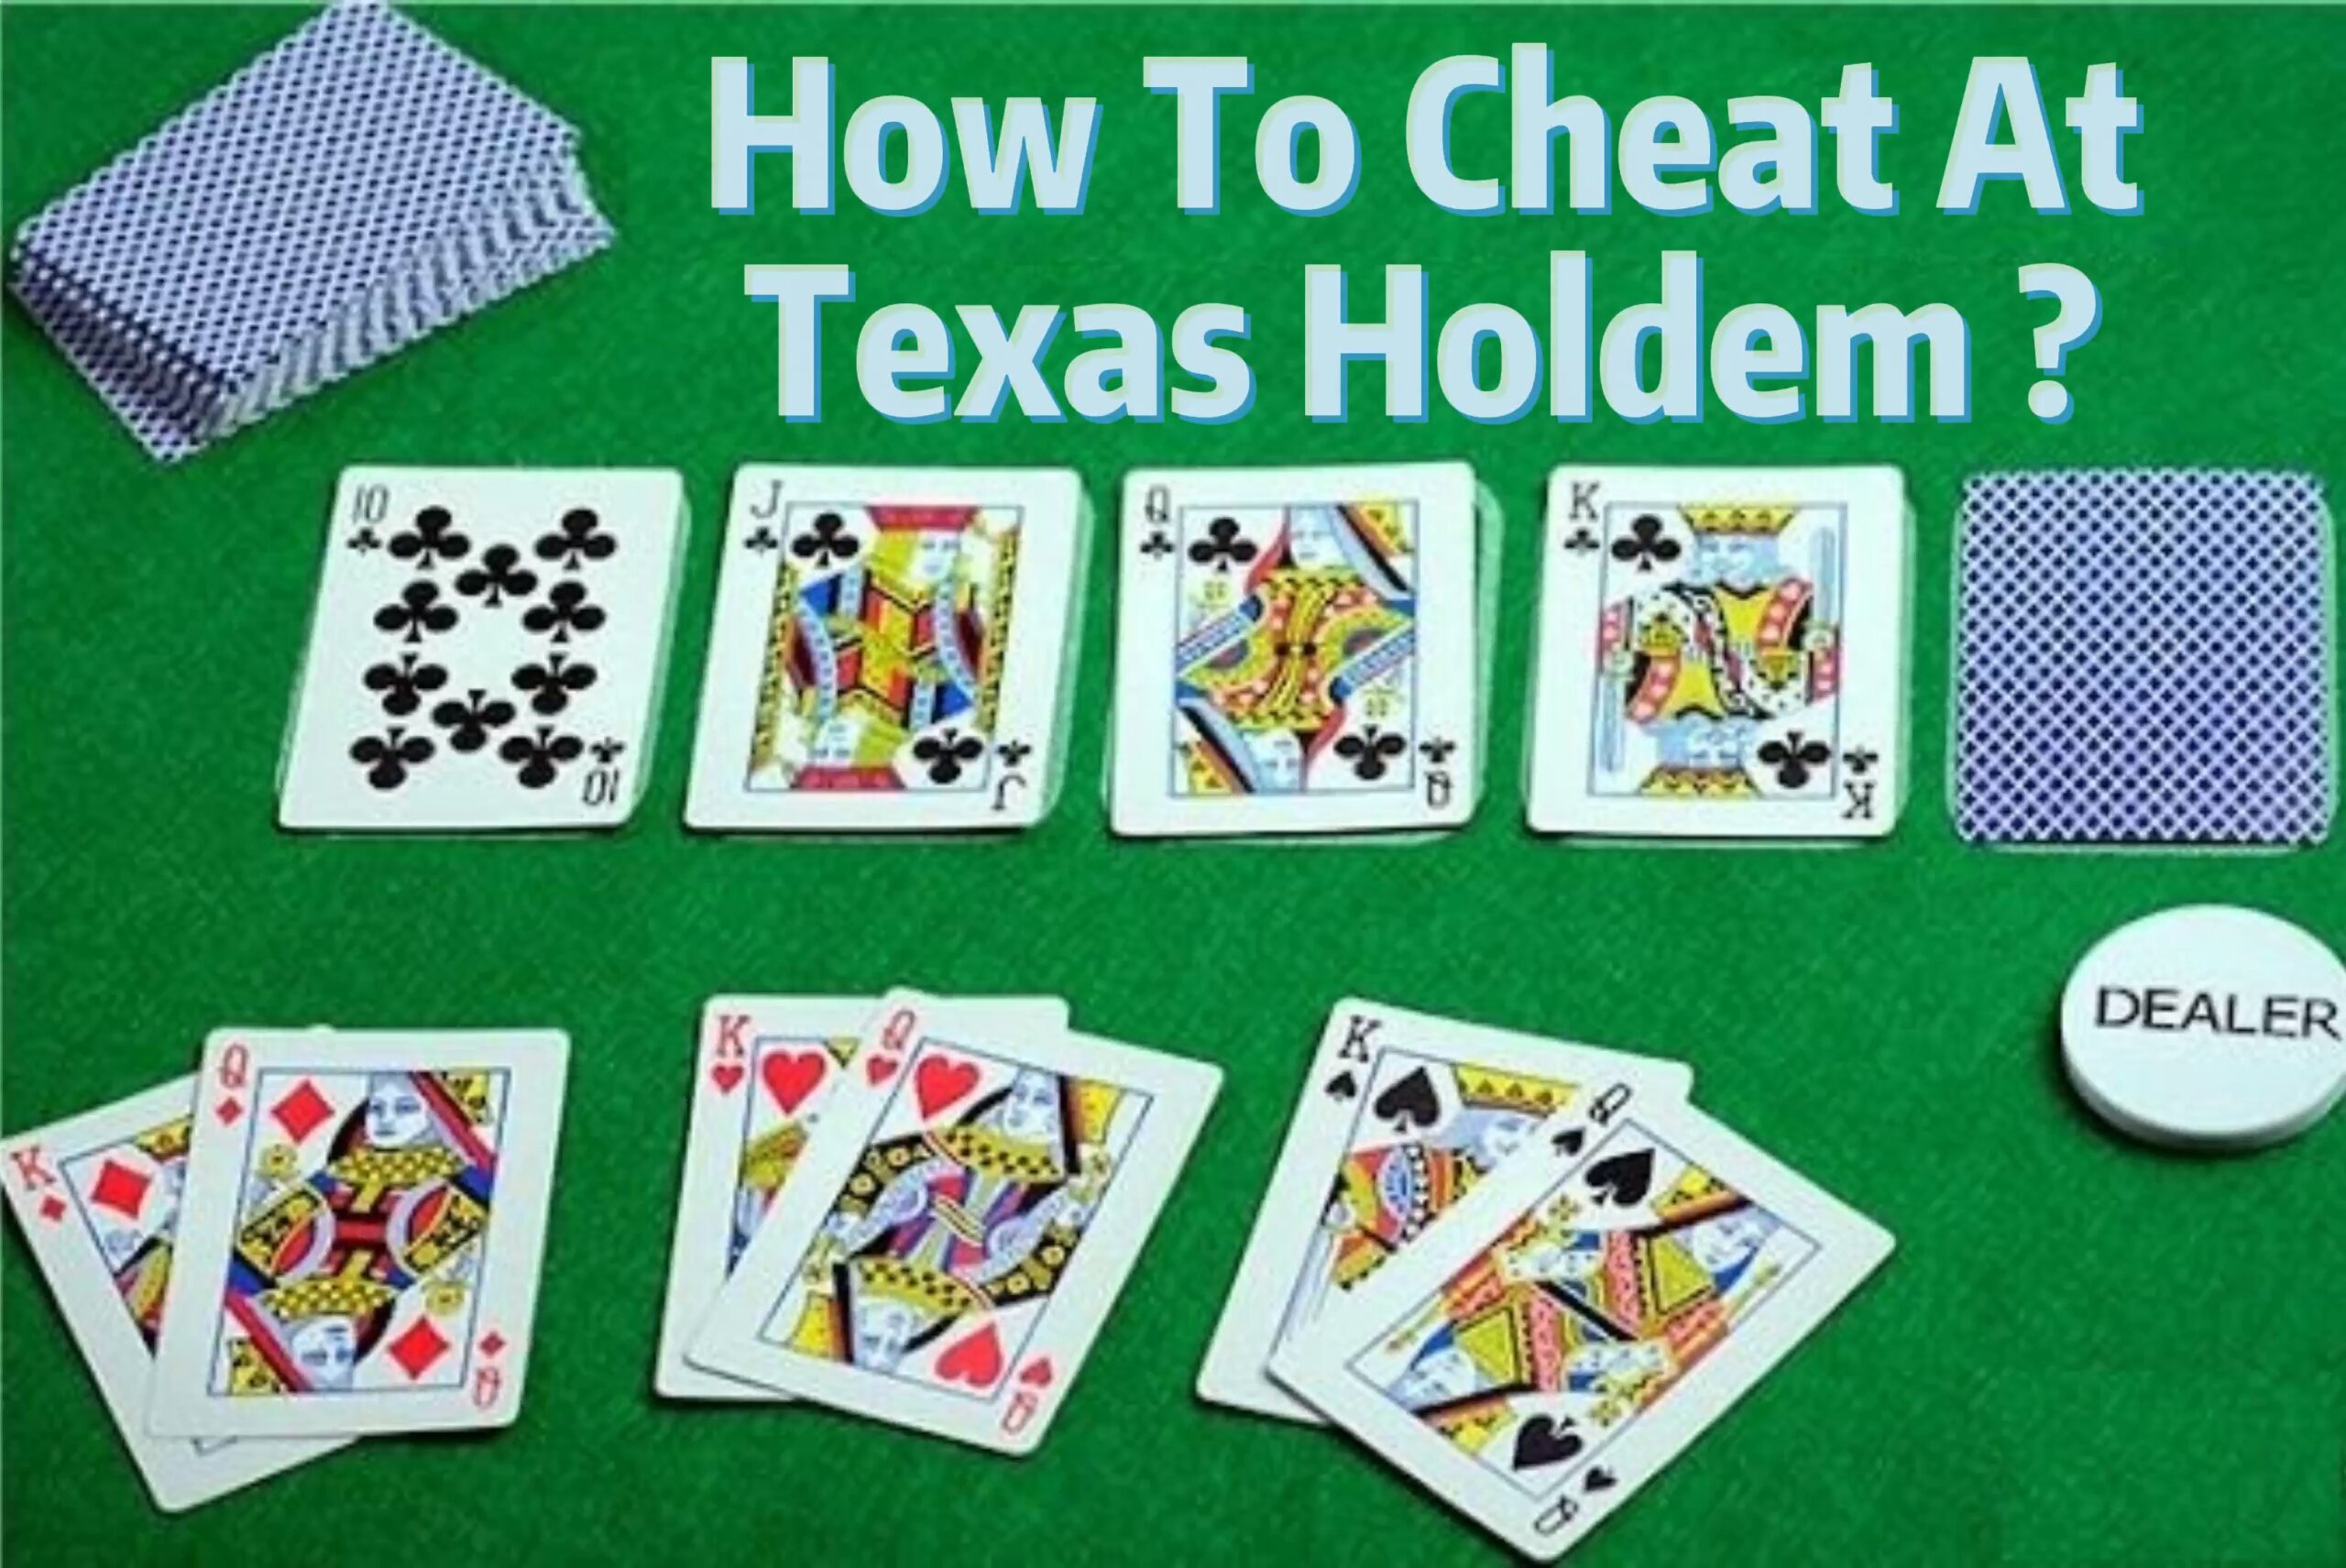 How To Cheat At Texas Holdem